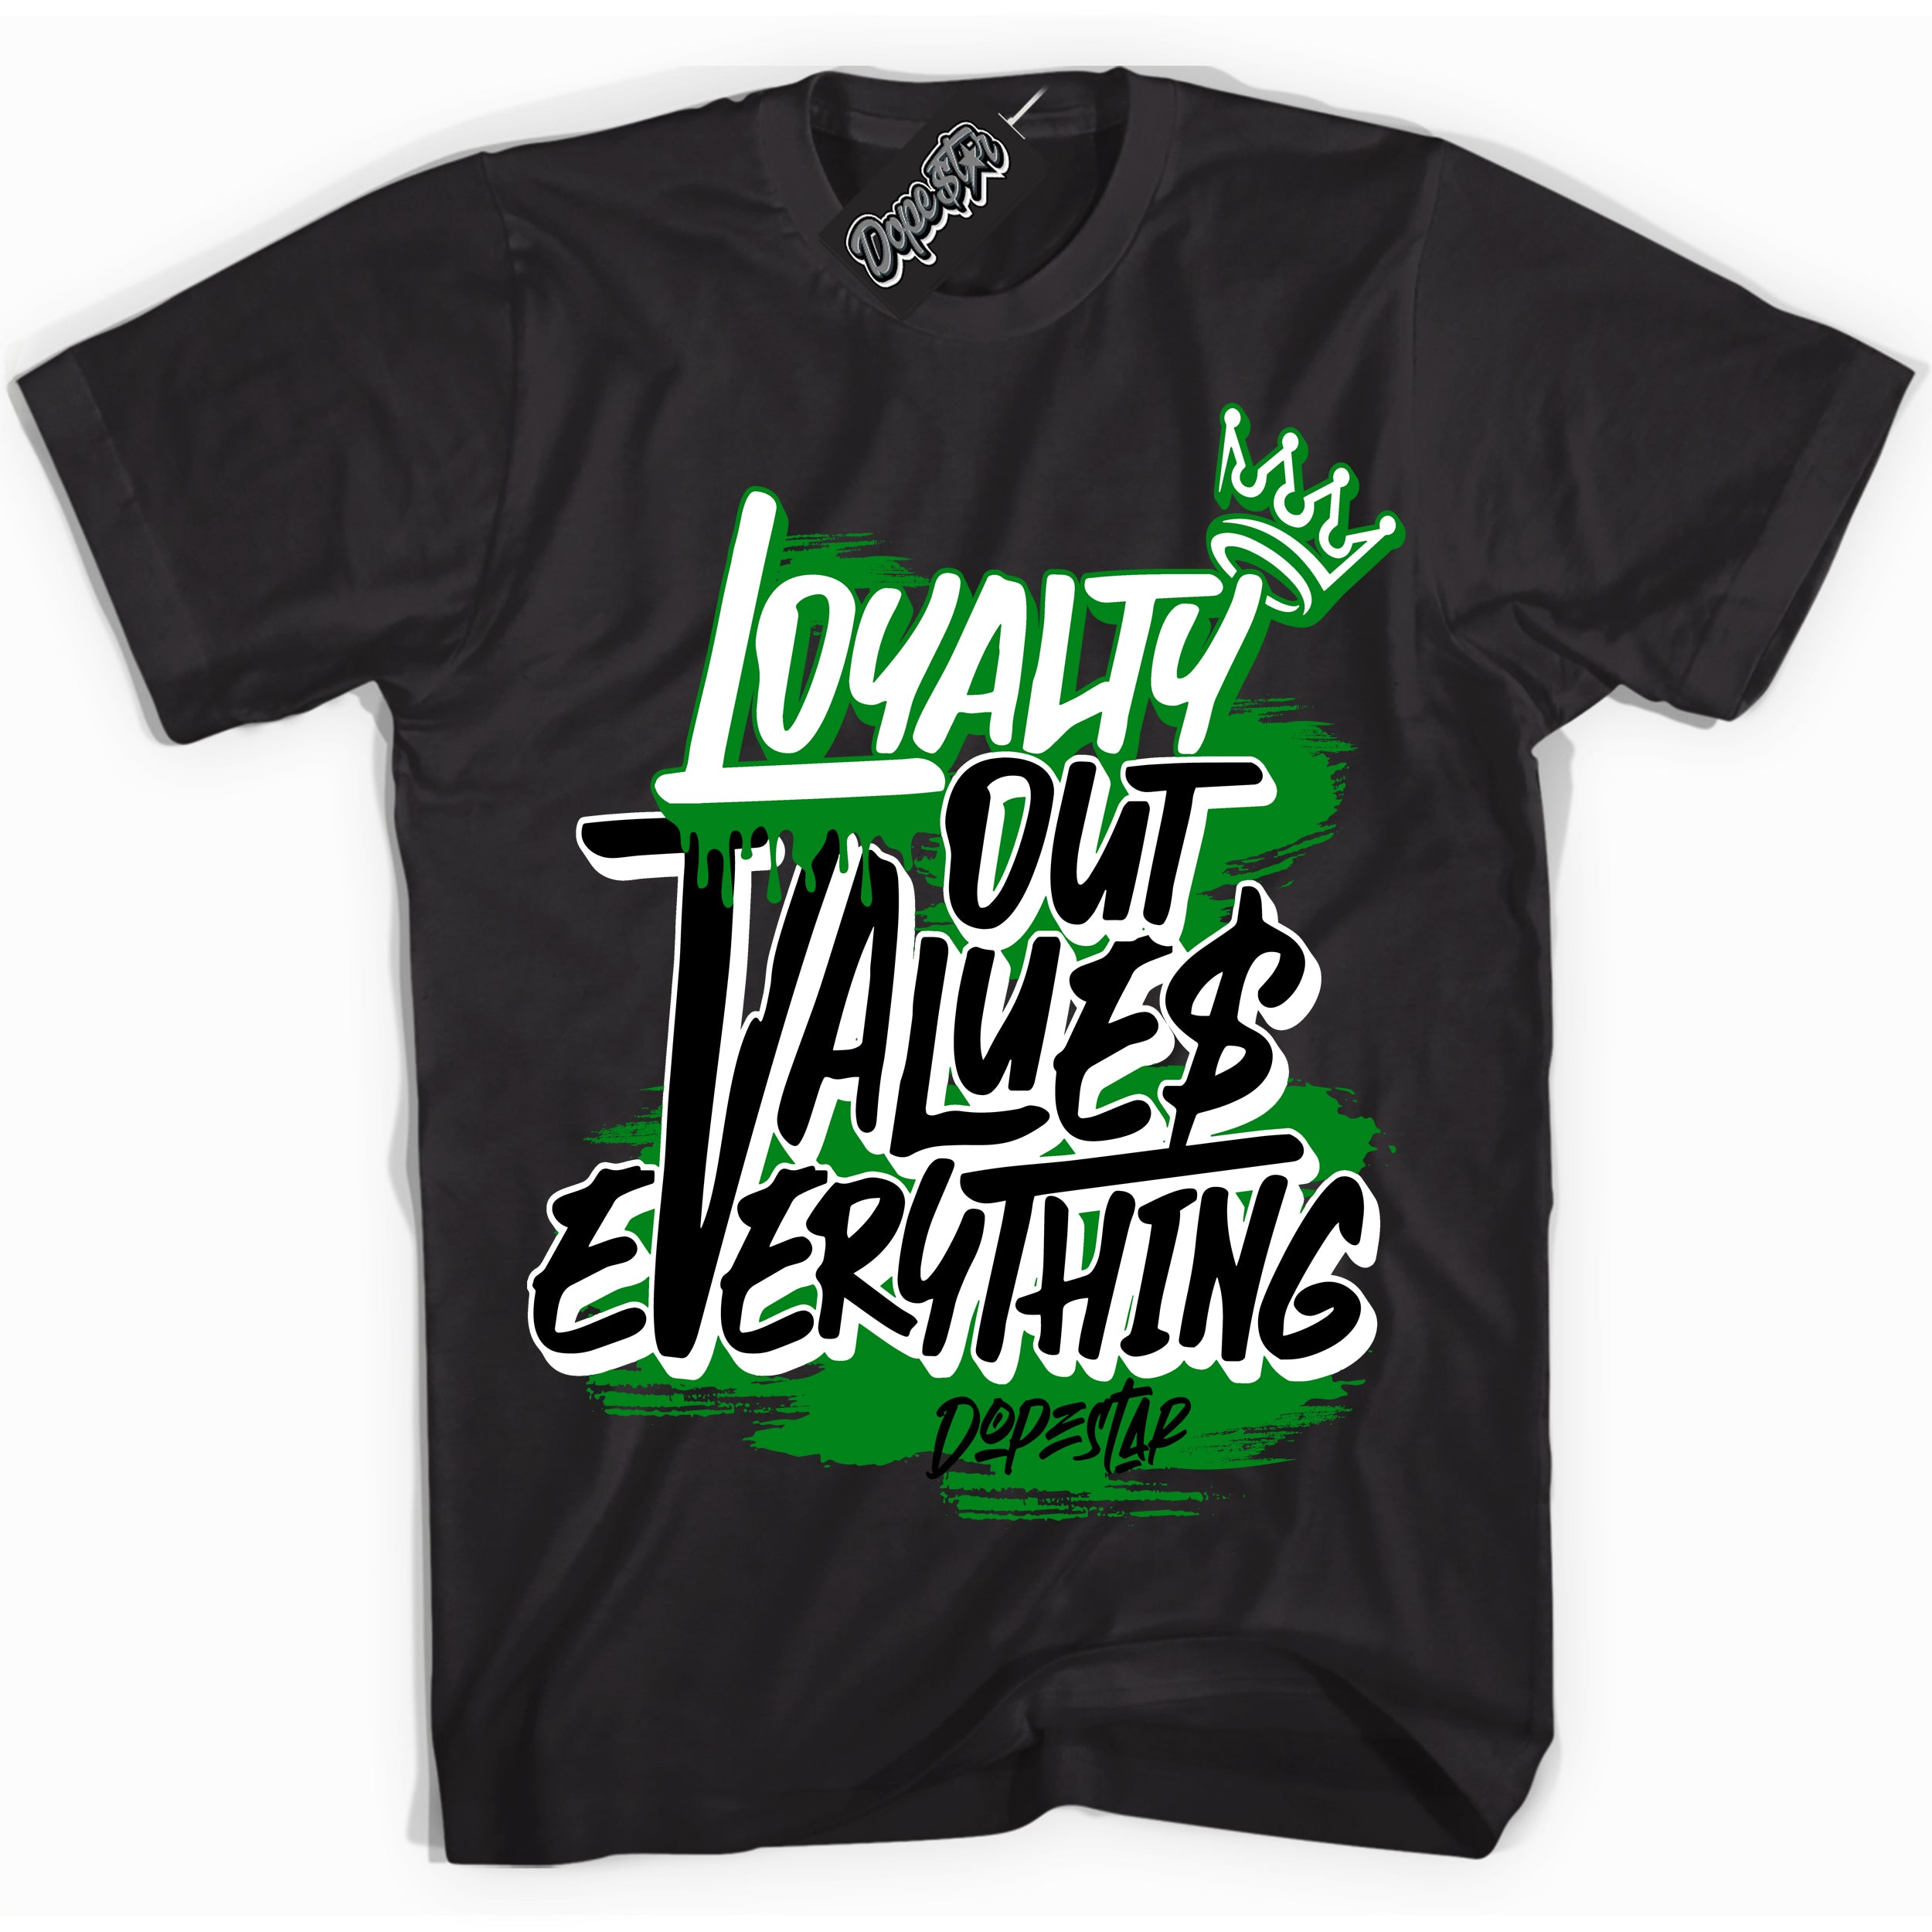 Cool Black Shirt with “ Loyalty Out Values Everything” design that perfectly matches Lucky Green 1s Sneakers.